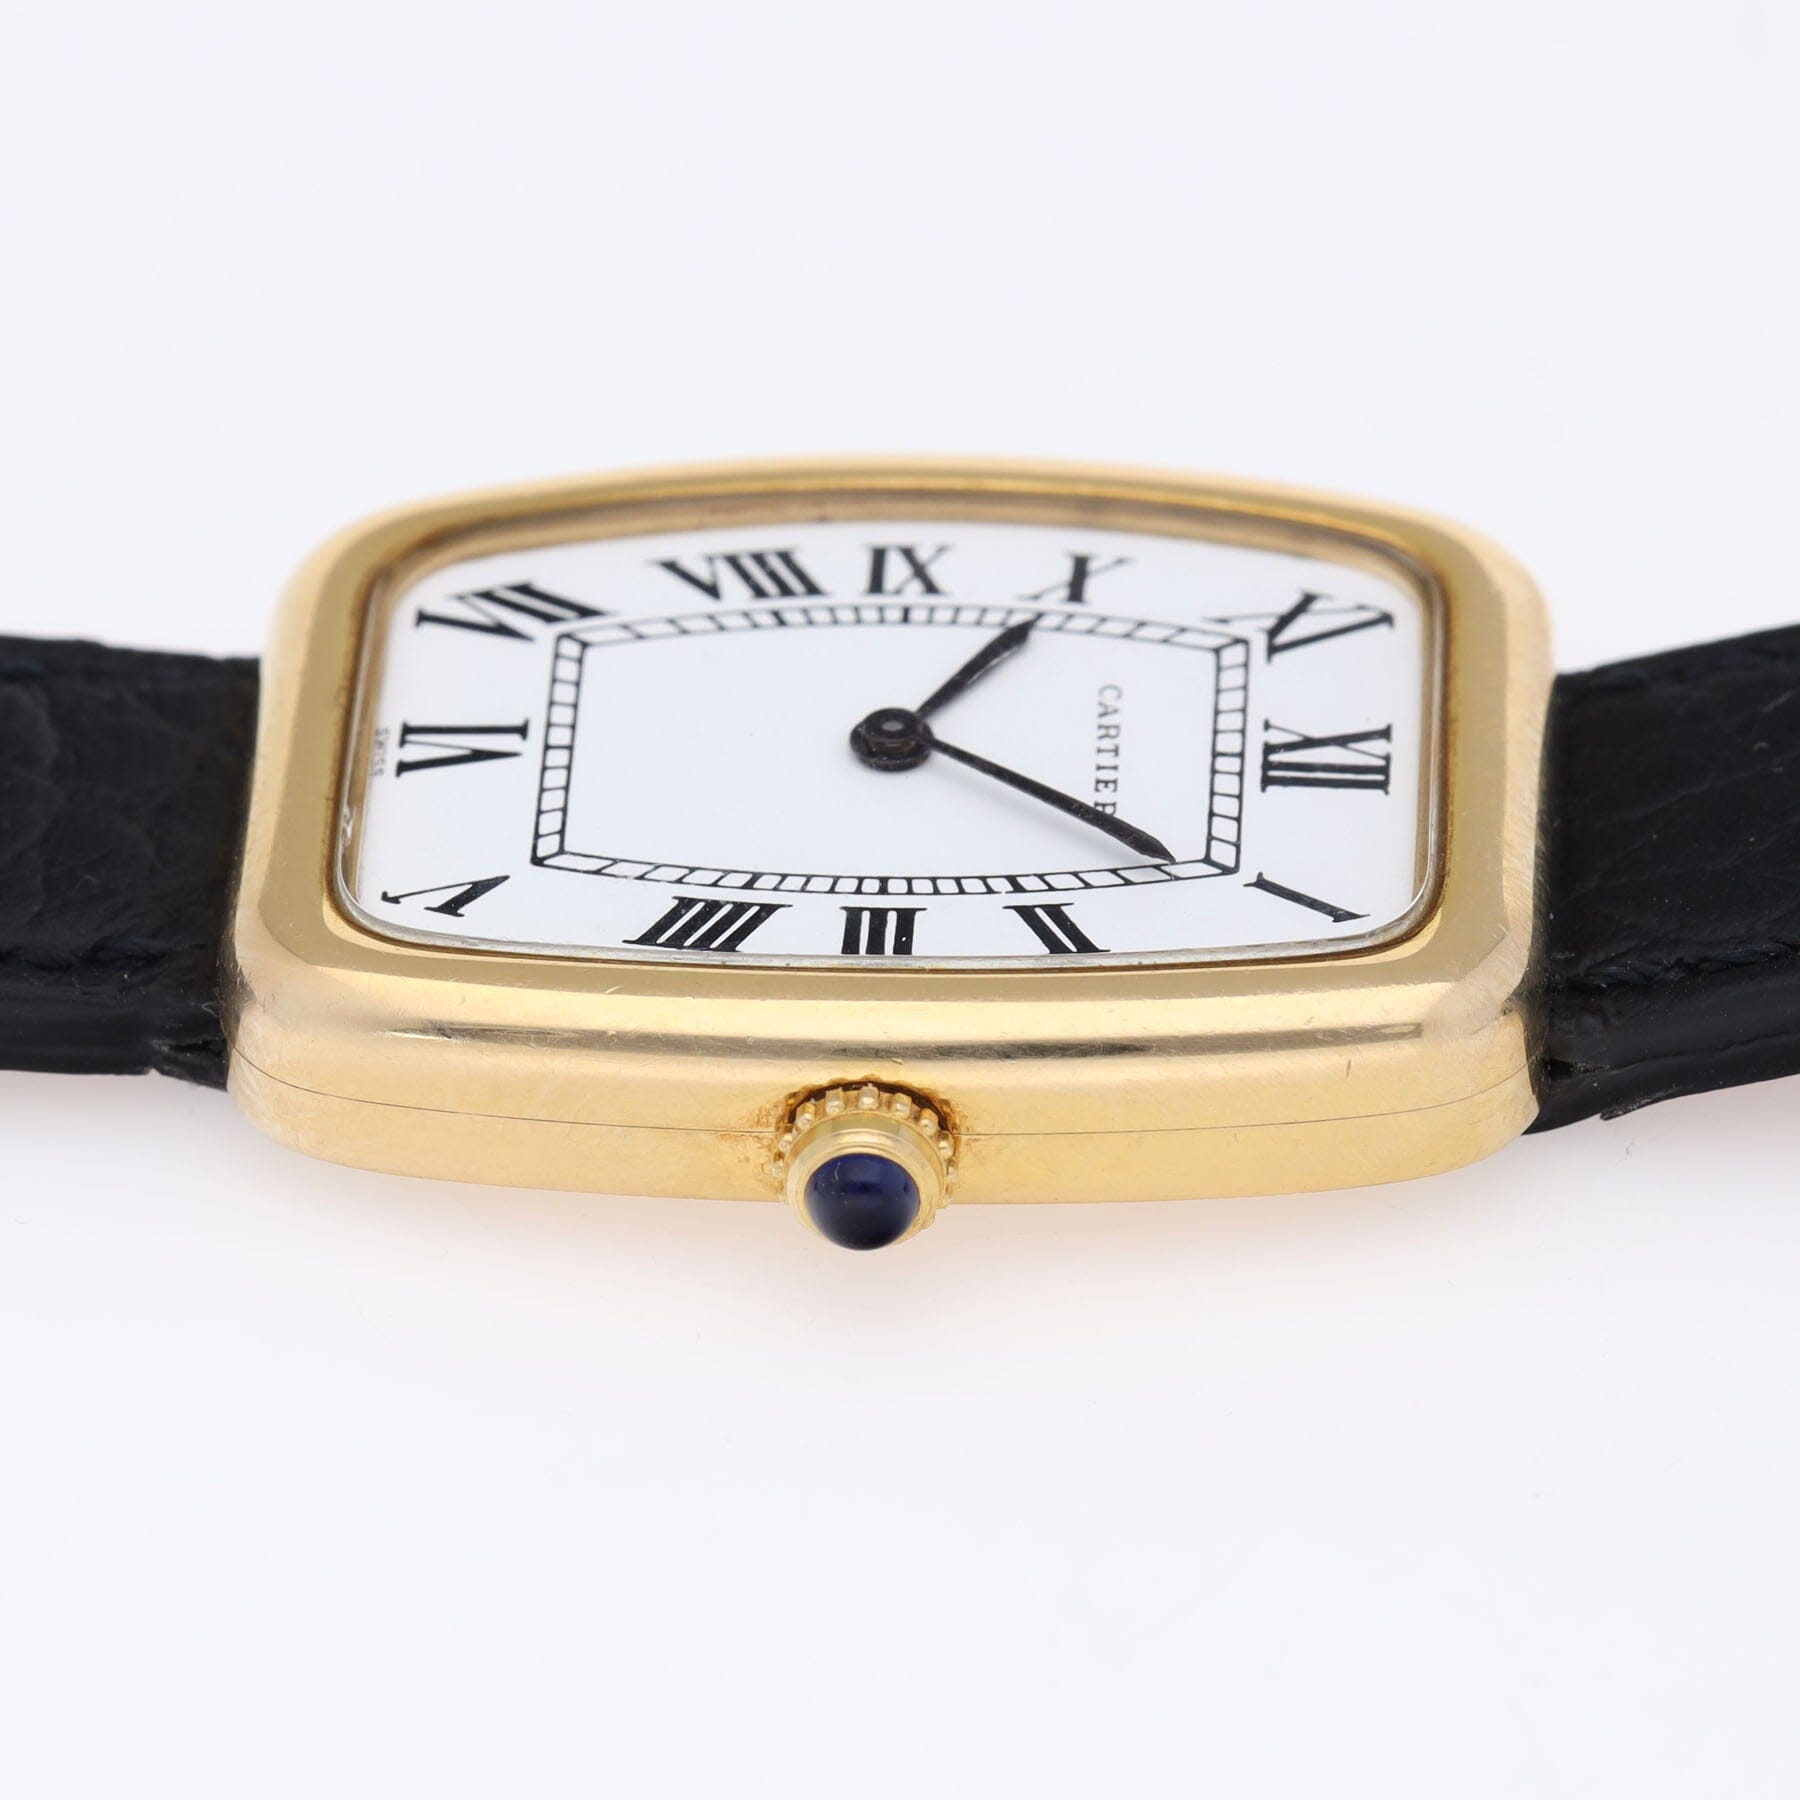 Cartier Faberge 7810 18kt Yellow Gold